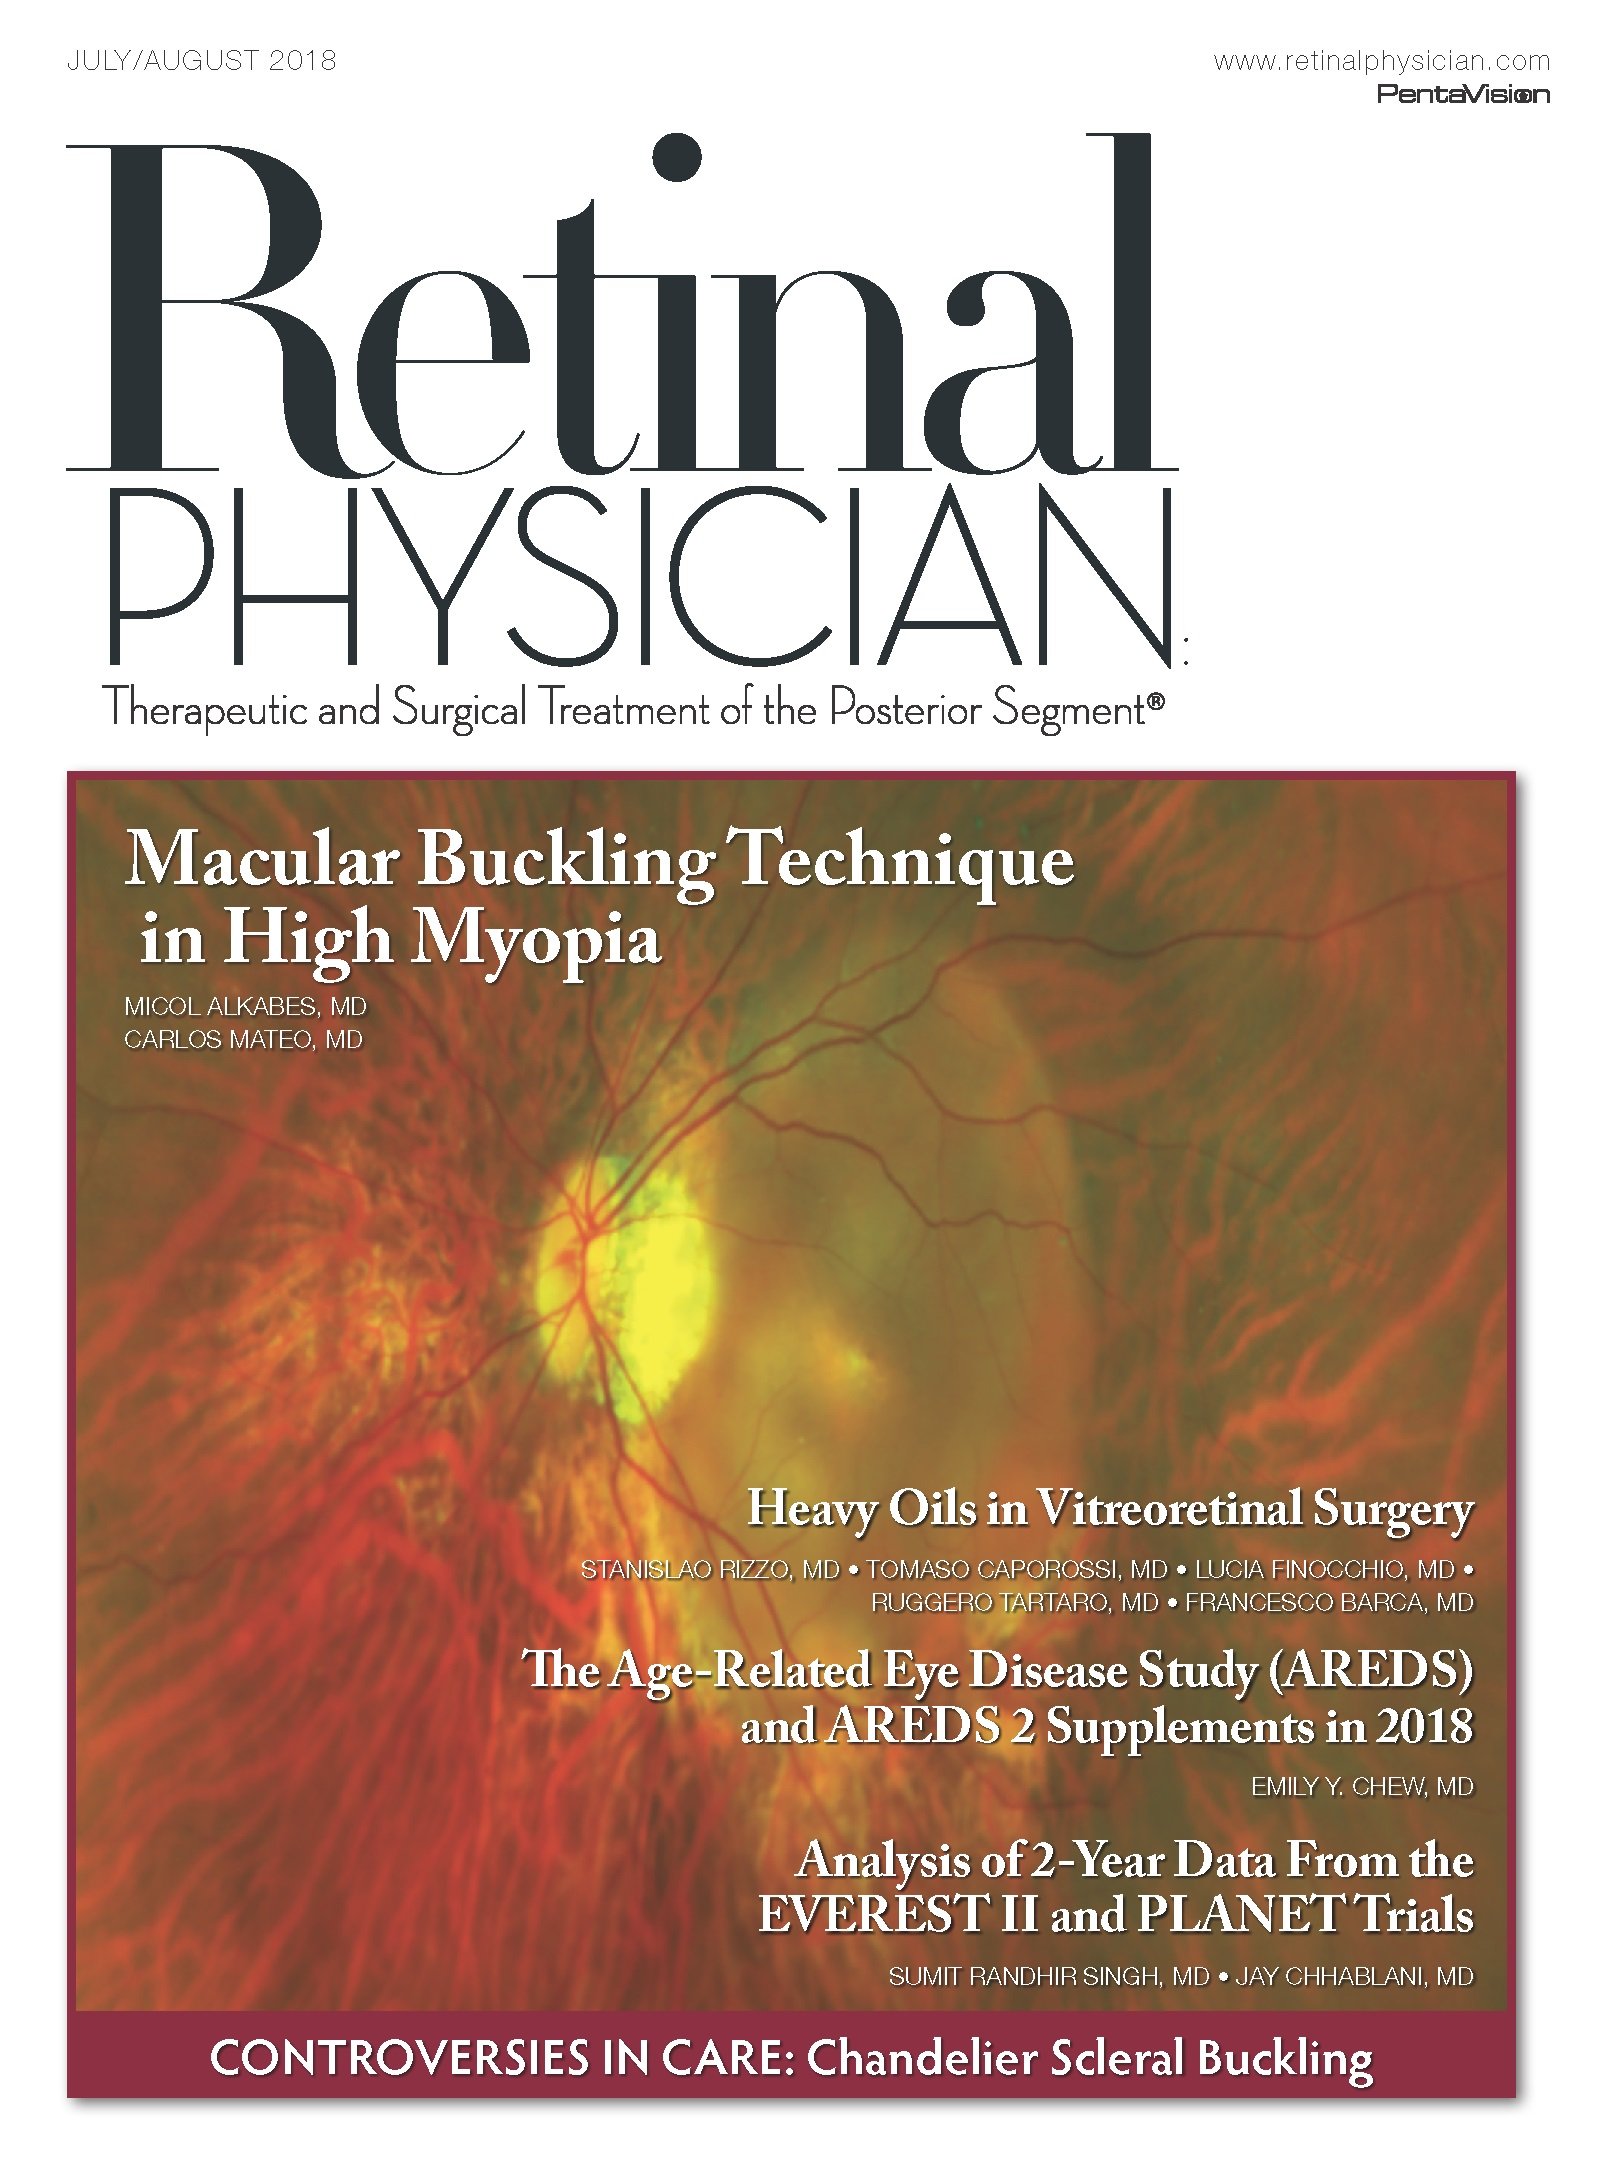 Retinal Physician July/August 2018 image